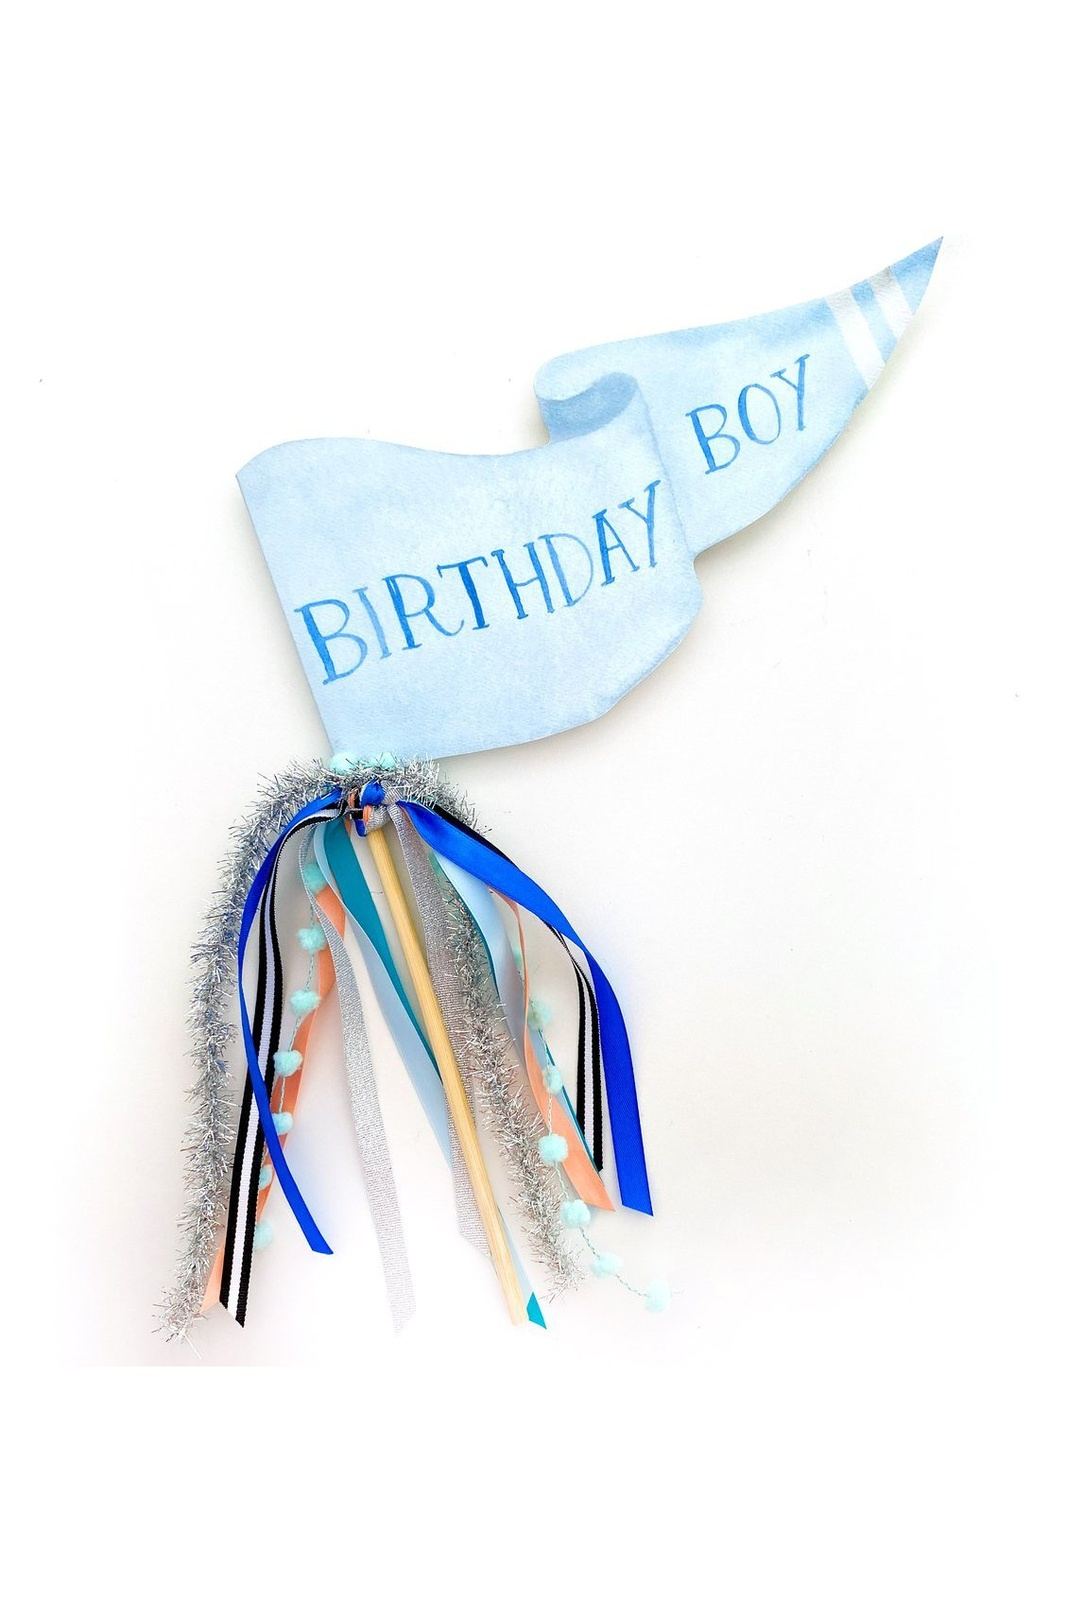 Birthday Boy Party Pennant - Tea for Three: A Children's Boutique-New Arrivals-TheT43Shop